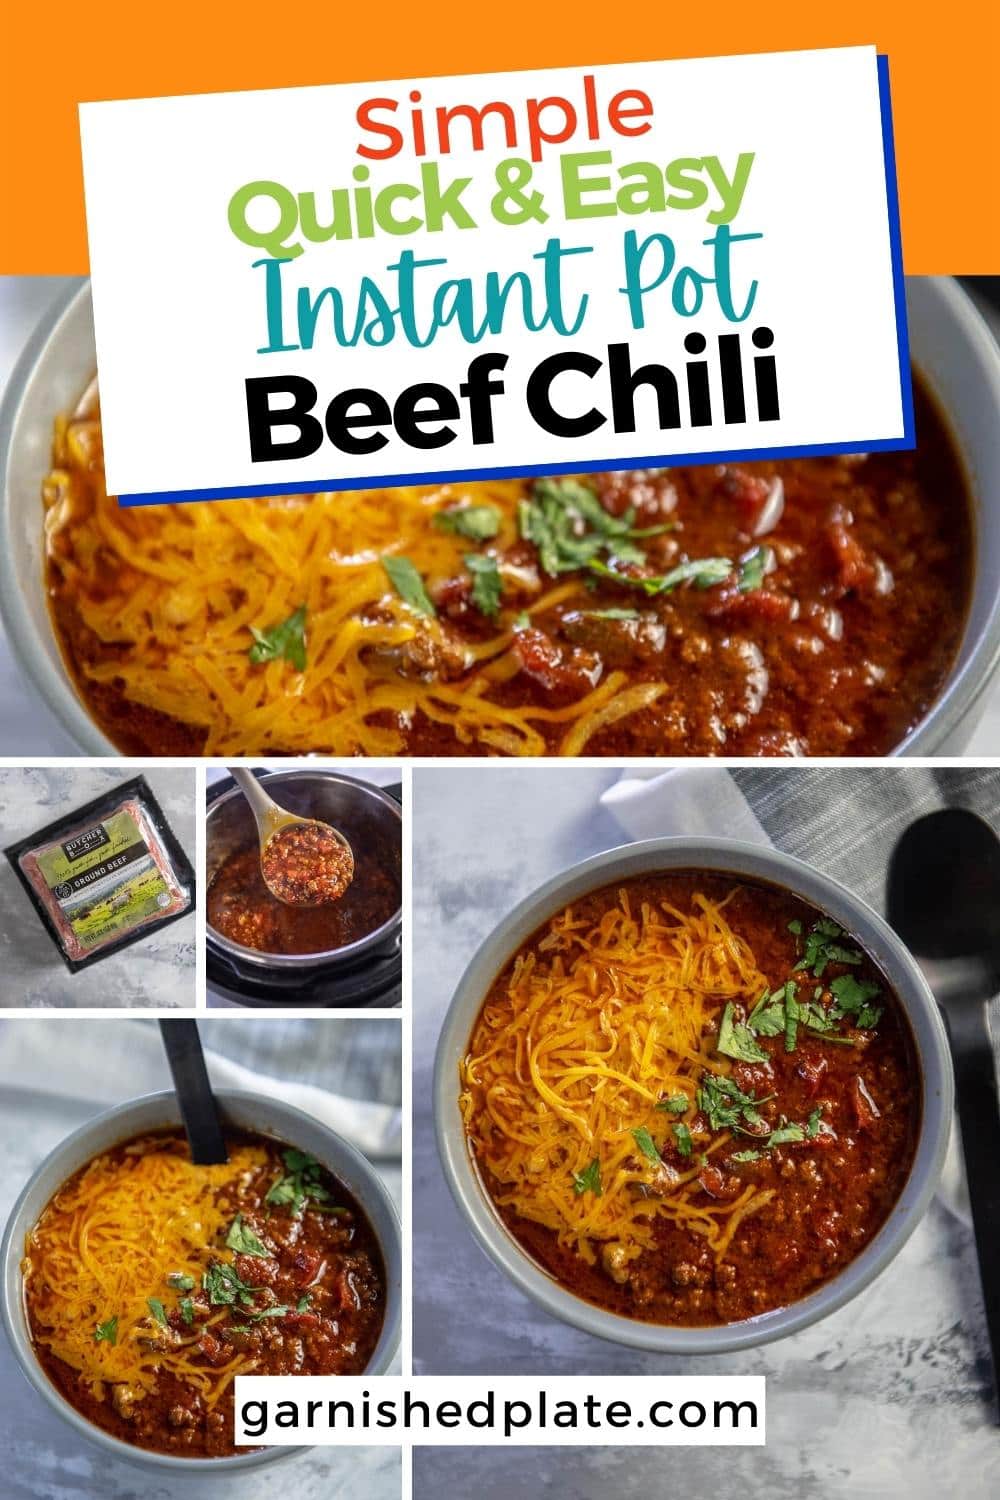 Instant Pot Beef Chili - Garnished Plate